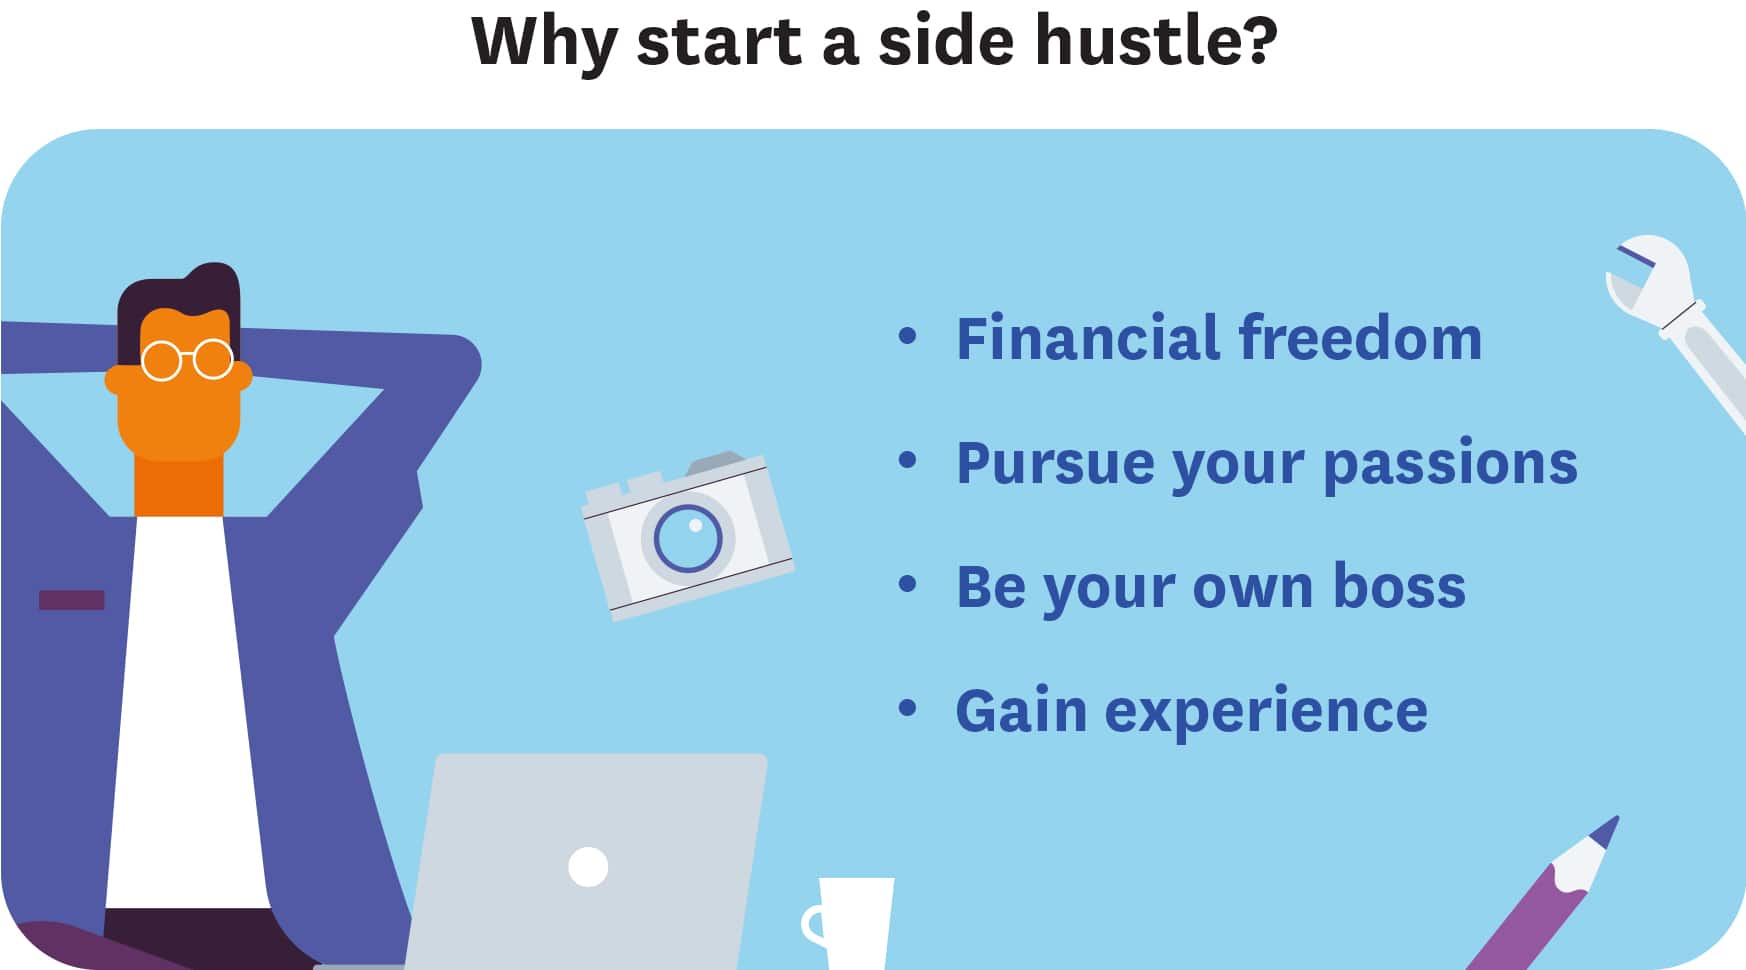 Side hustles can help workers find financial freedom, pursue their passions, be their own boss, and gain experience.